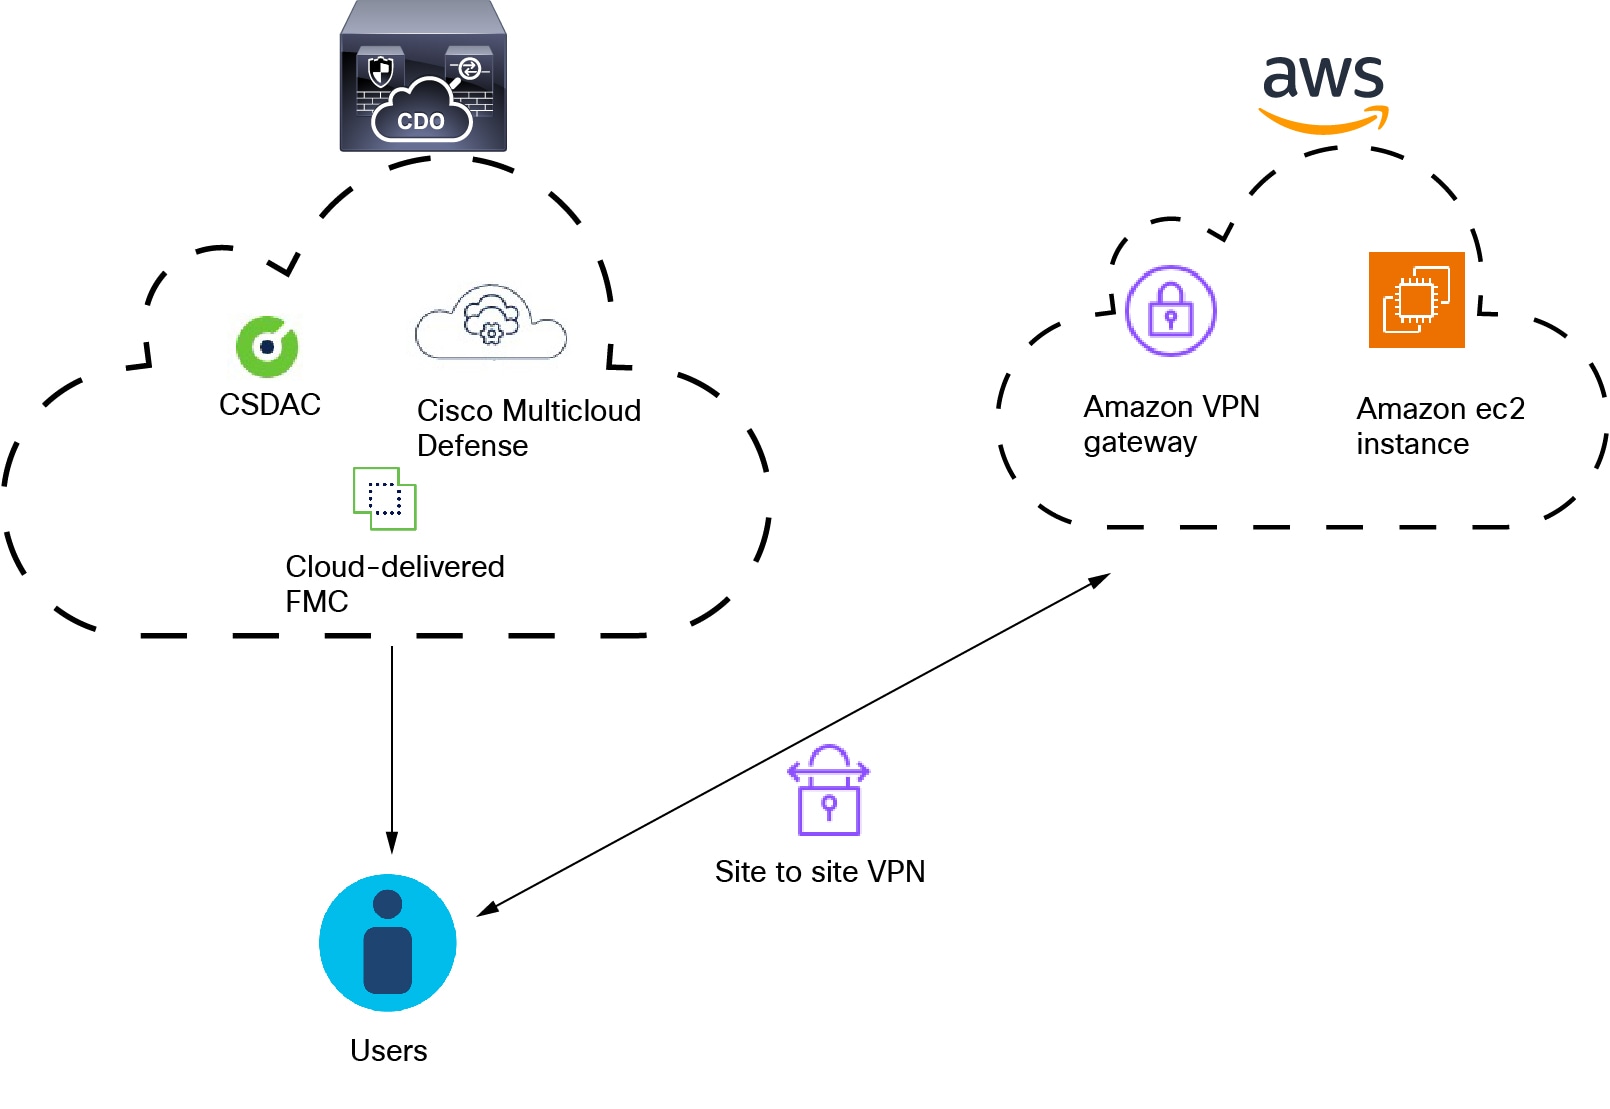 The Cisco Multicloud Defense connector sends IP addresses from AWS to the Cloud-delivered Firewall Management Center